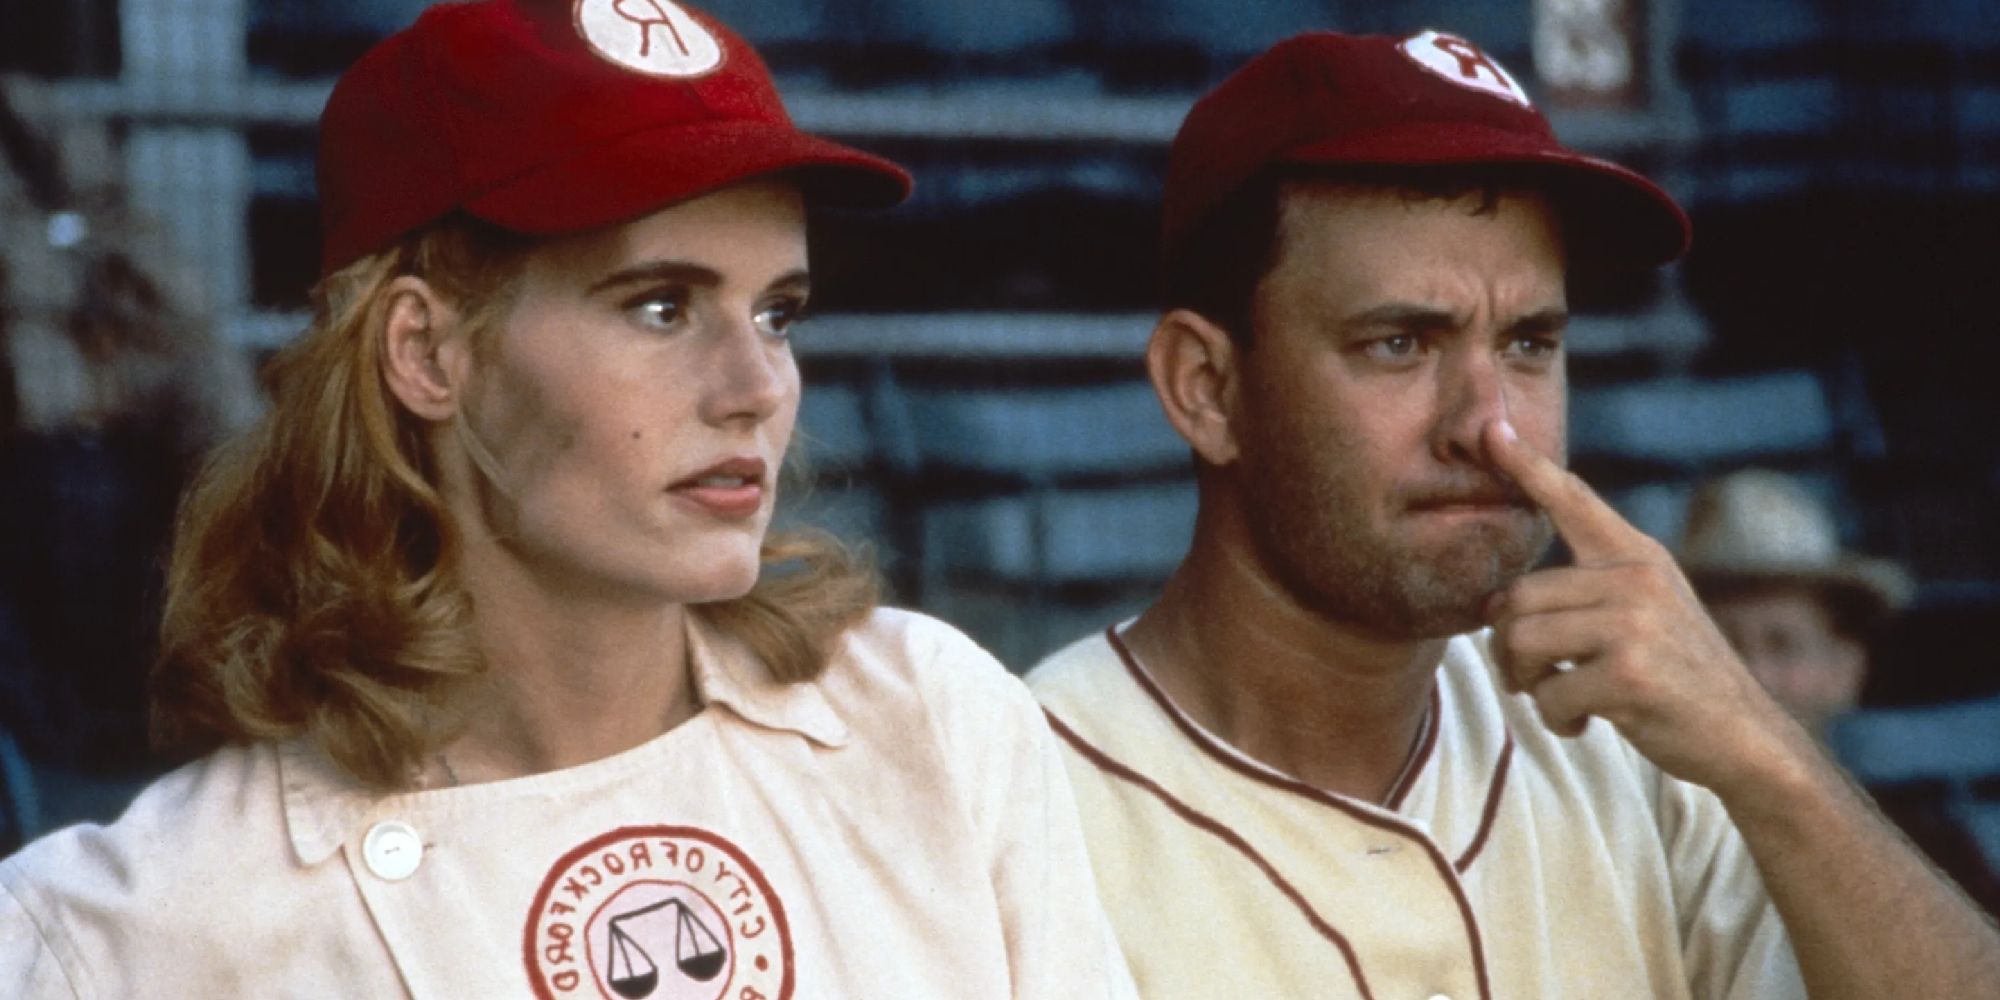 Tom Hanks and Geena Davis in A League Of Their Own